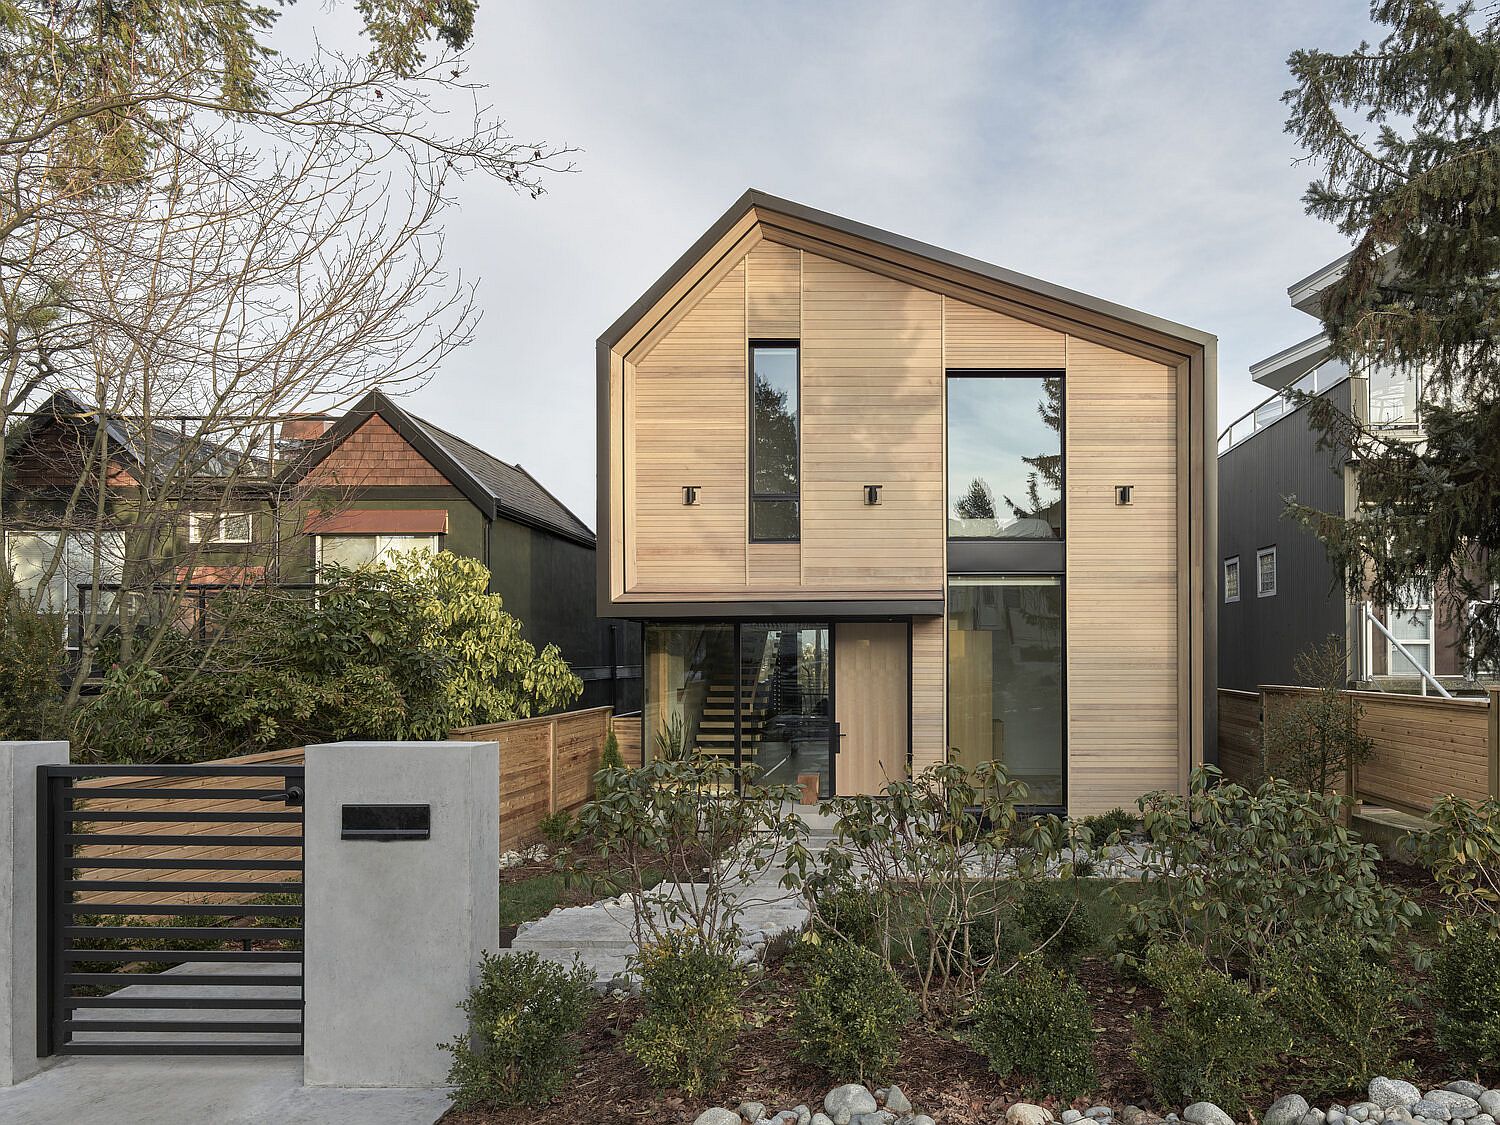 Fabulous multi-level family house in Vancouver with a warm wooden exterior